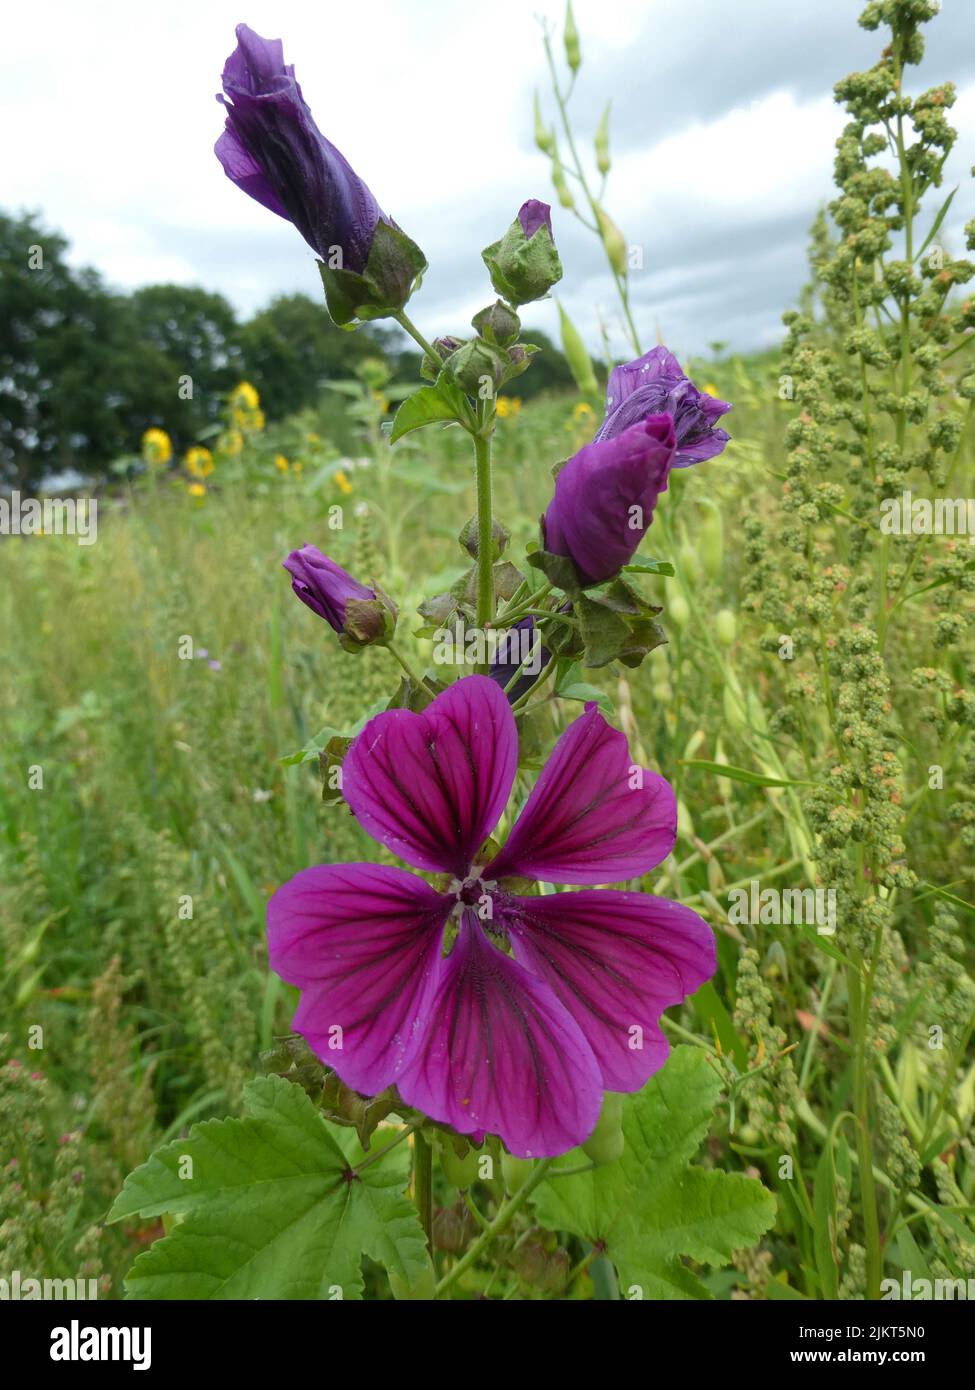 Malva sylvestris or common mallow in a meadow. It is a vigorous plant with showy flowers of bright mauve-purple, with dark veins, standing 1 meter hig Stock Photo